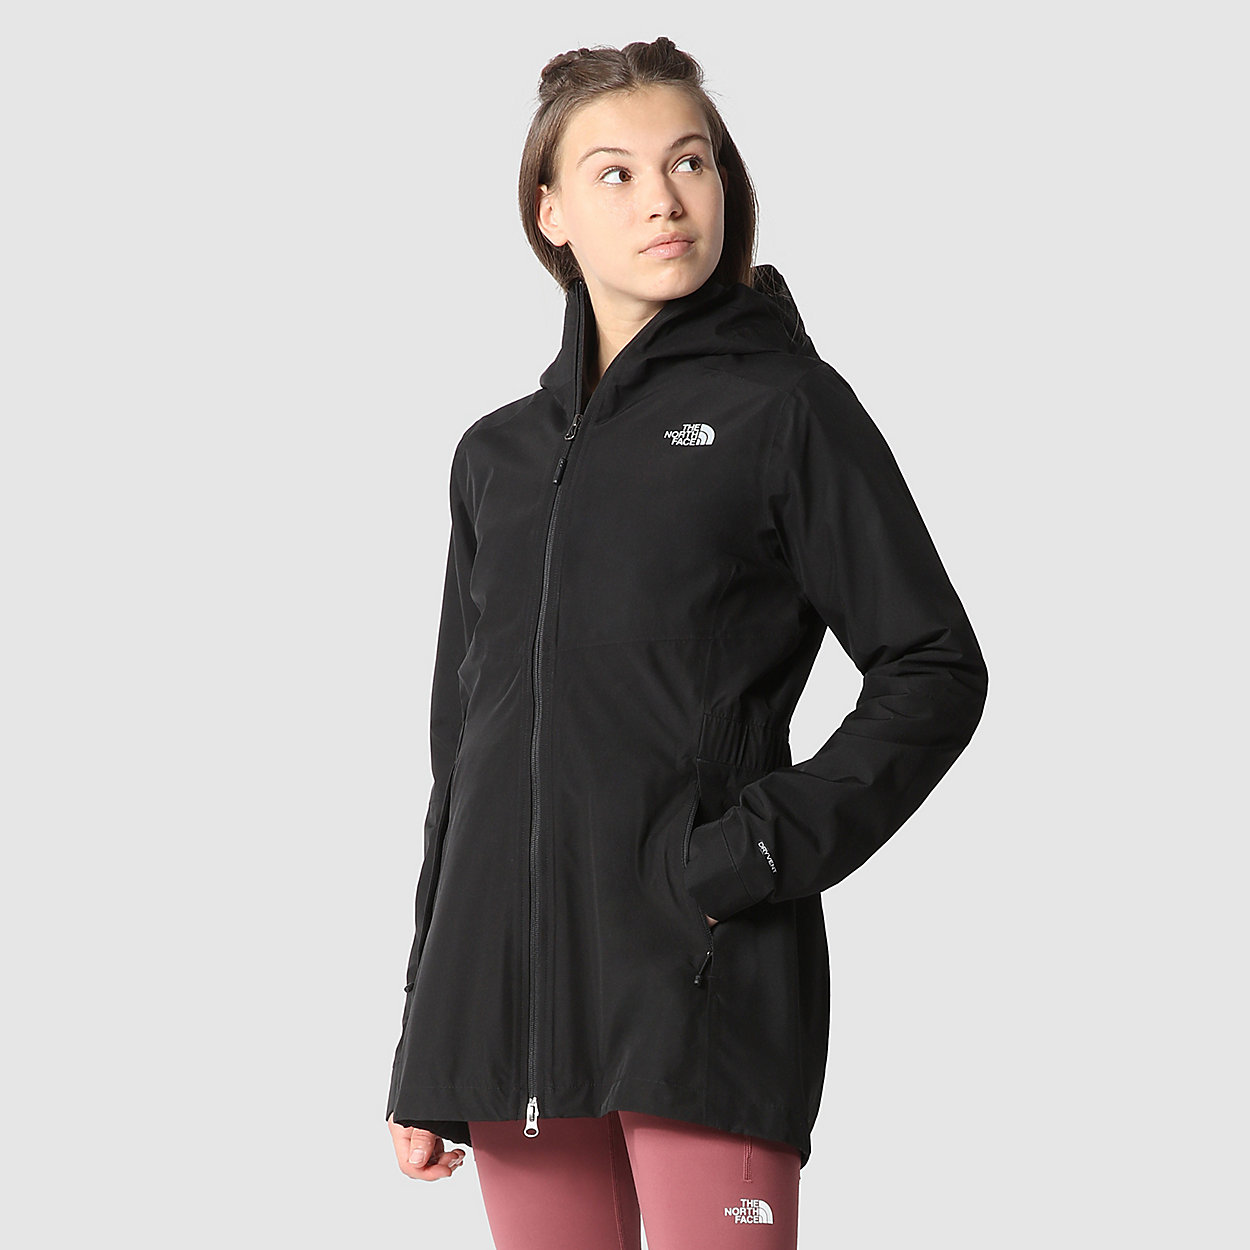 Unlock Wilderness' choice in the Mountain Warehouse Vs North Face comparison, the Hikesteller Parka Shell by The North Face